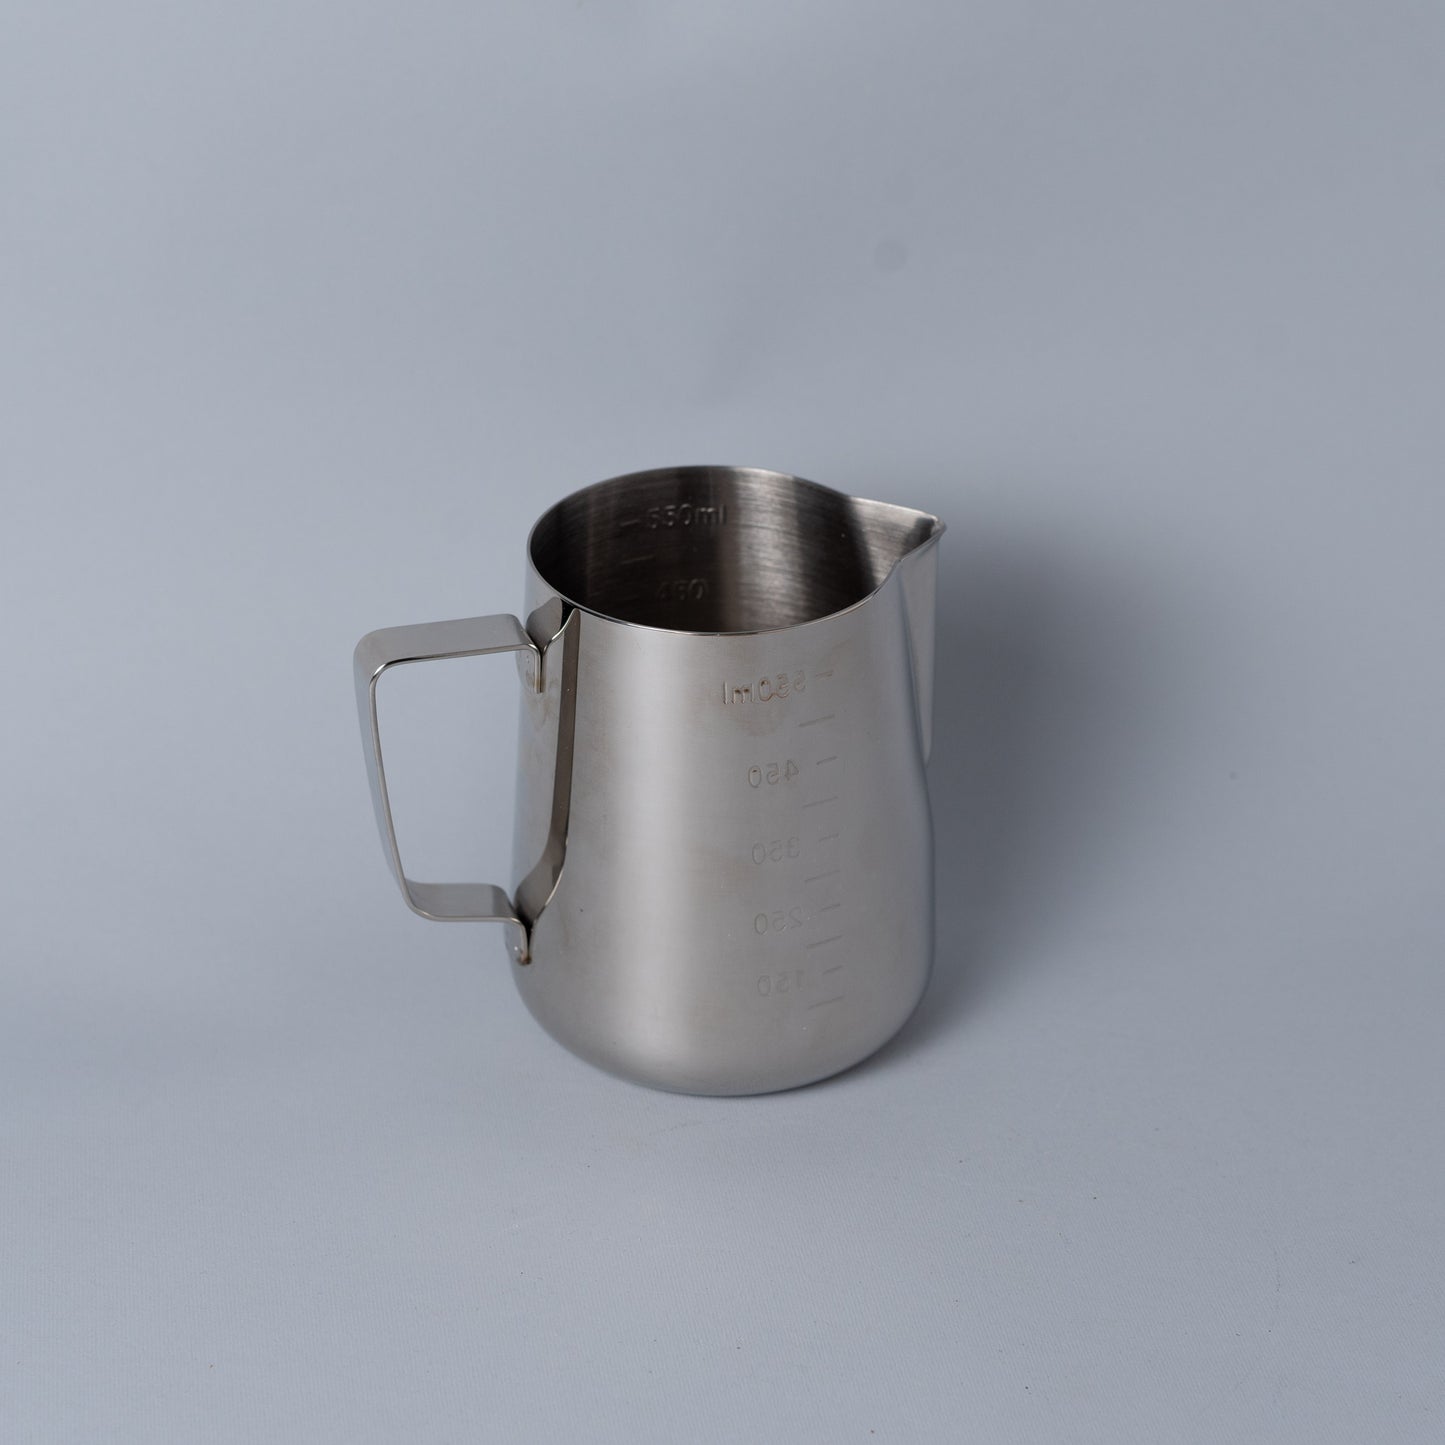 Stainless Steel Milk Frothing Pitcher - 550 ml